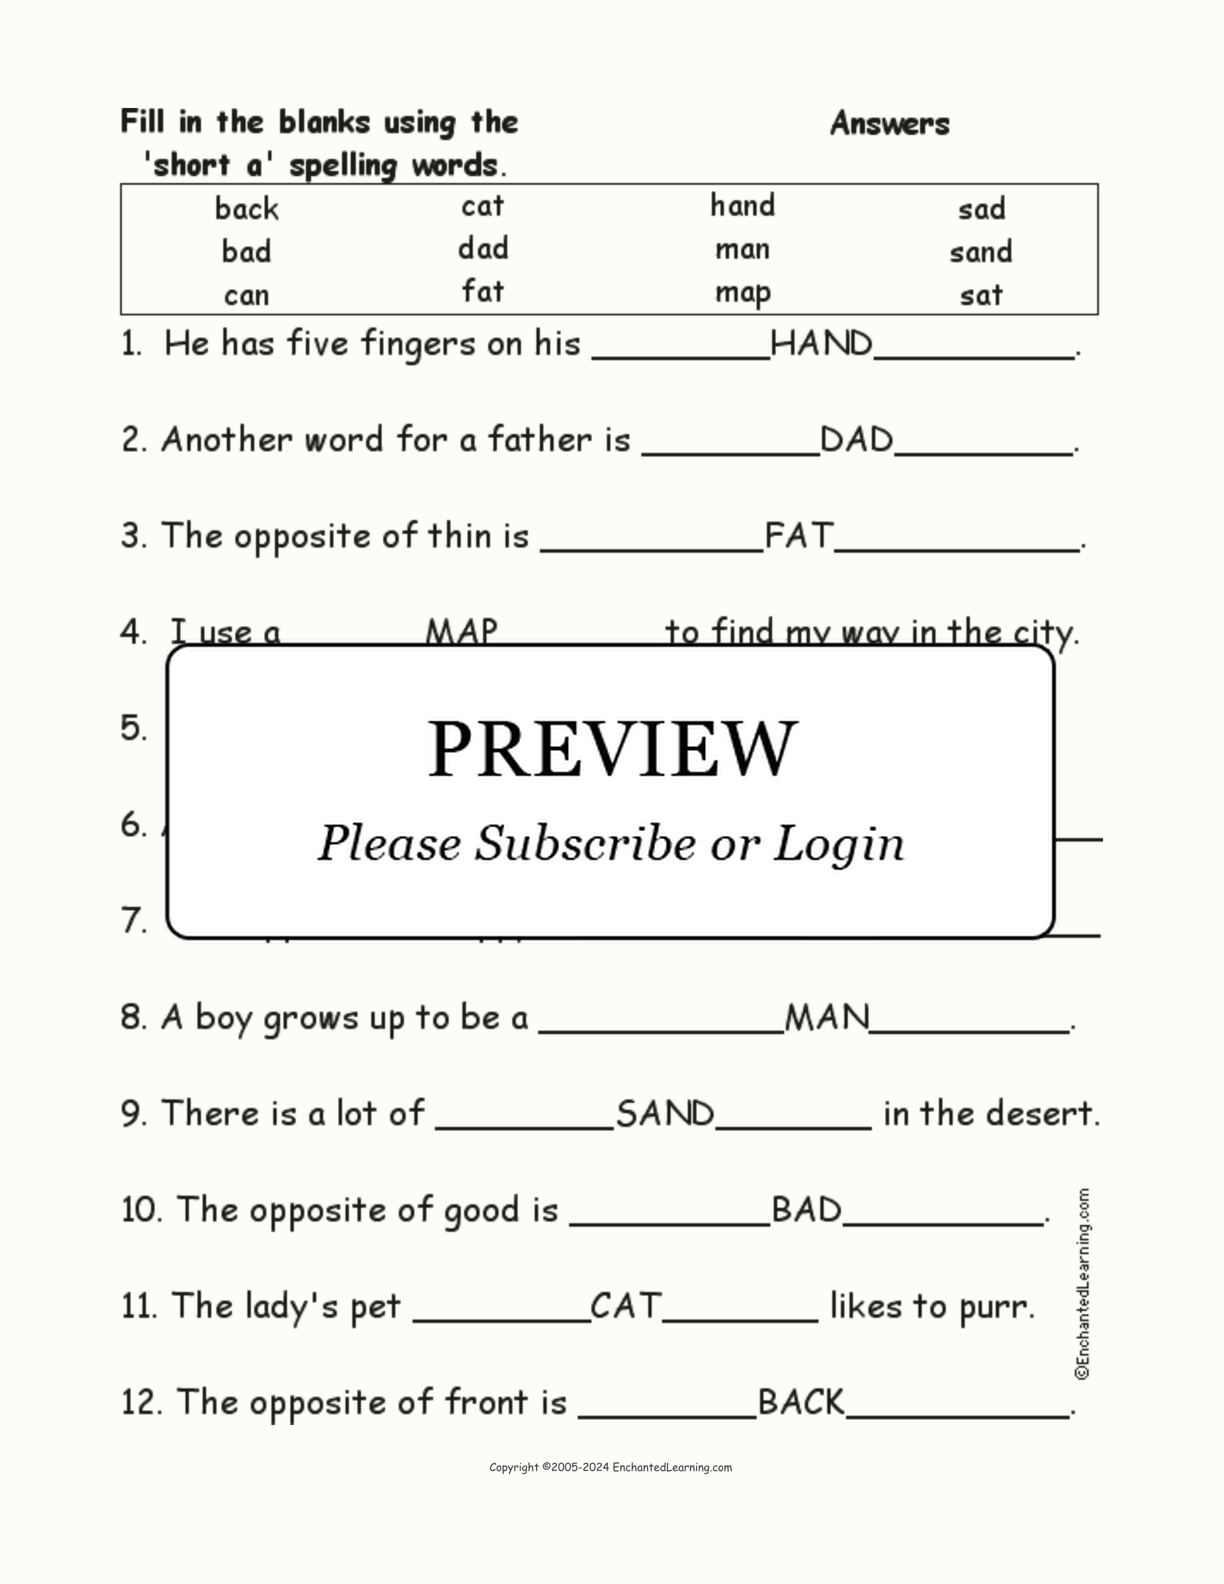 Short A: Spelling Word Questions interactive worksheet page 2